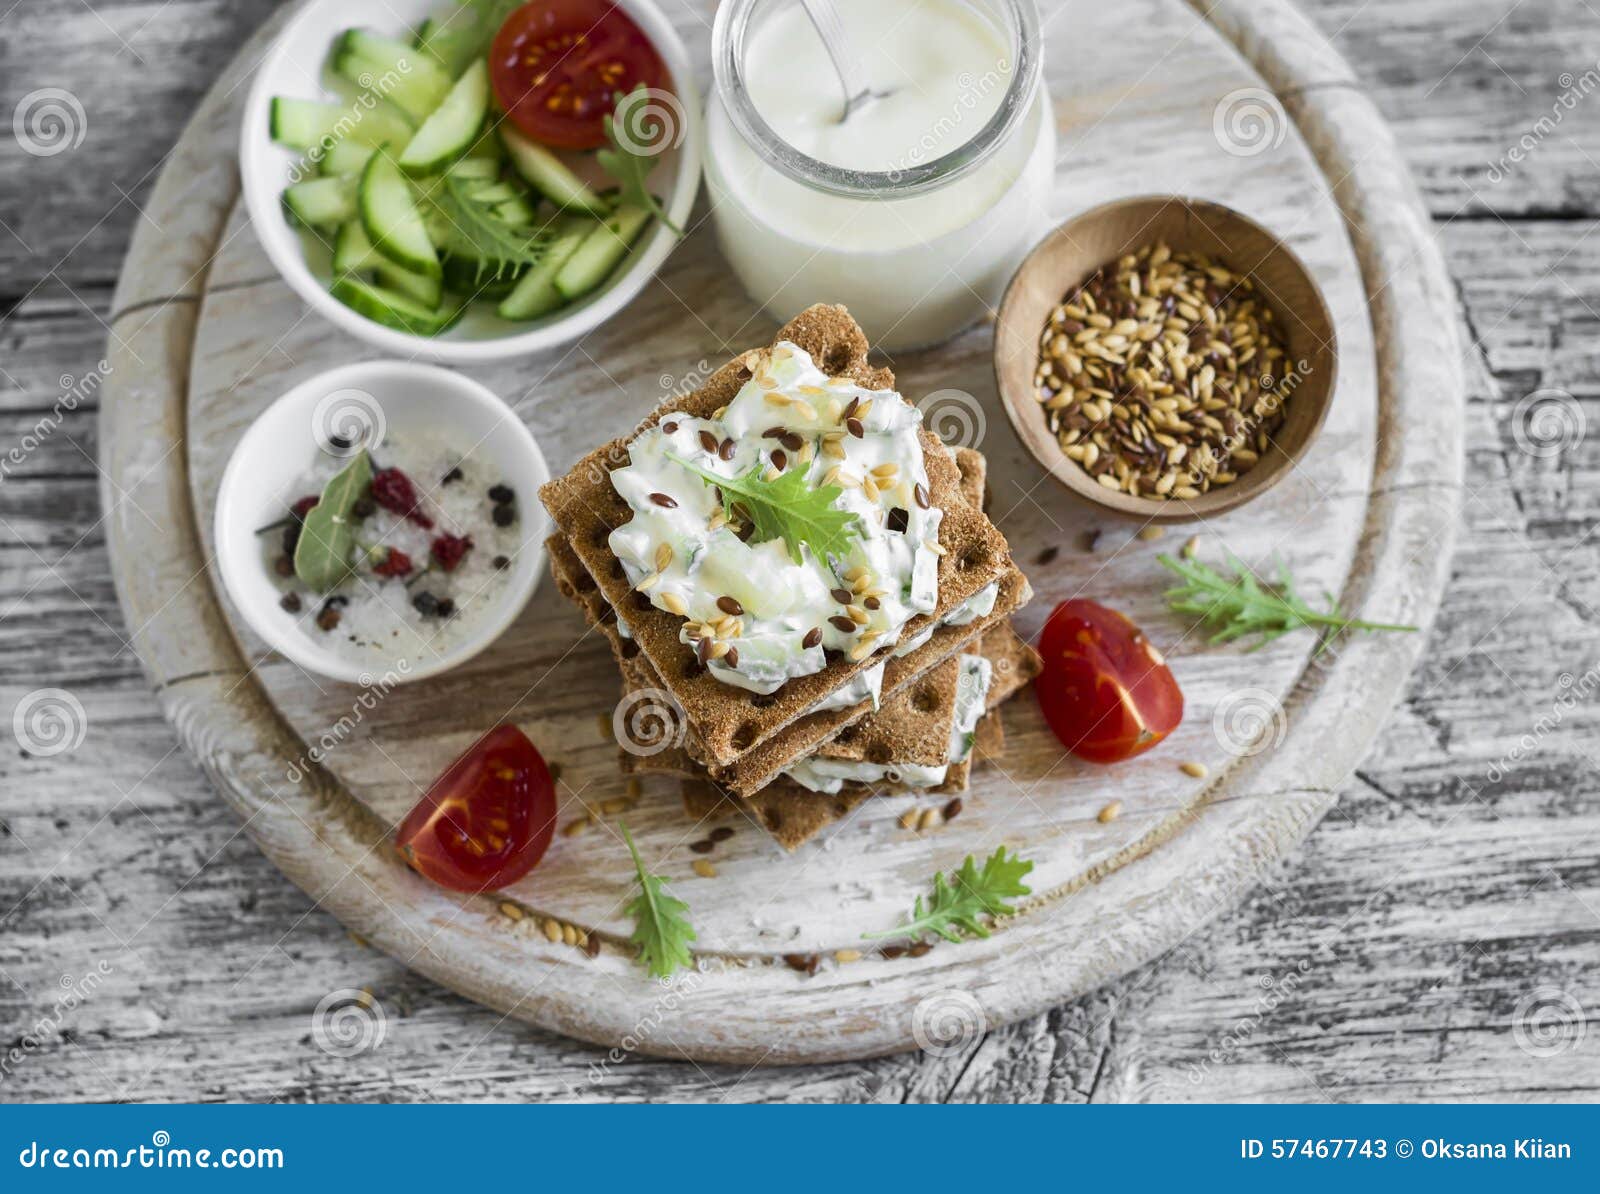 Healthy Snack Rye Crackers Cottage Cheese With Cucumber And